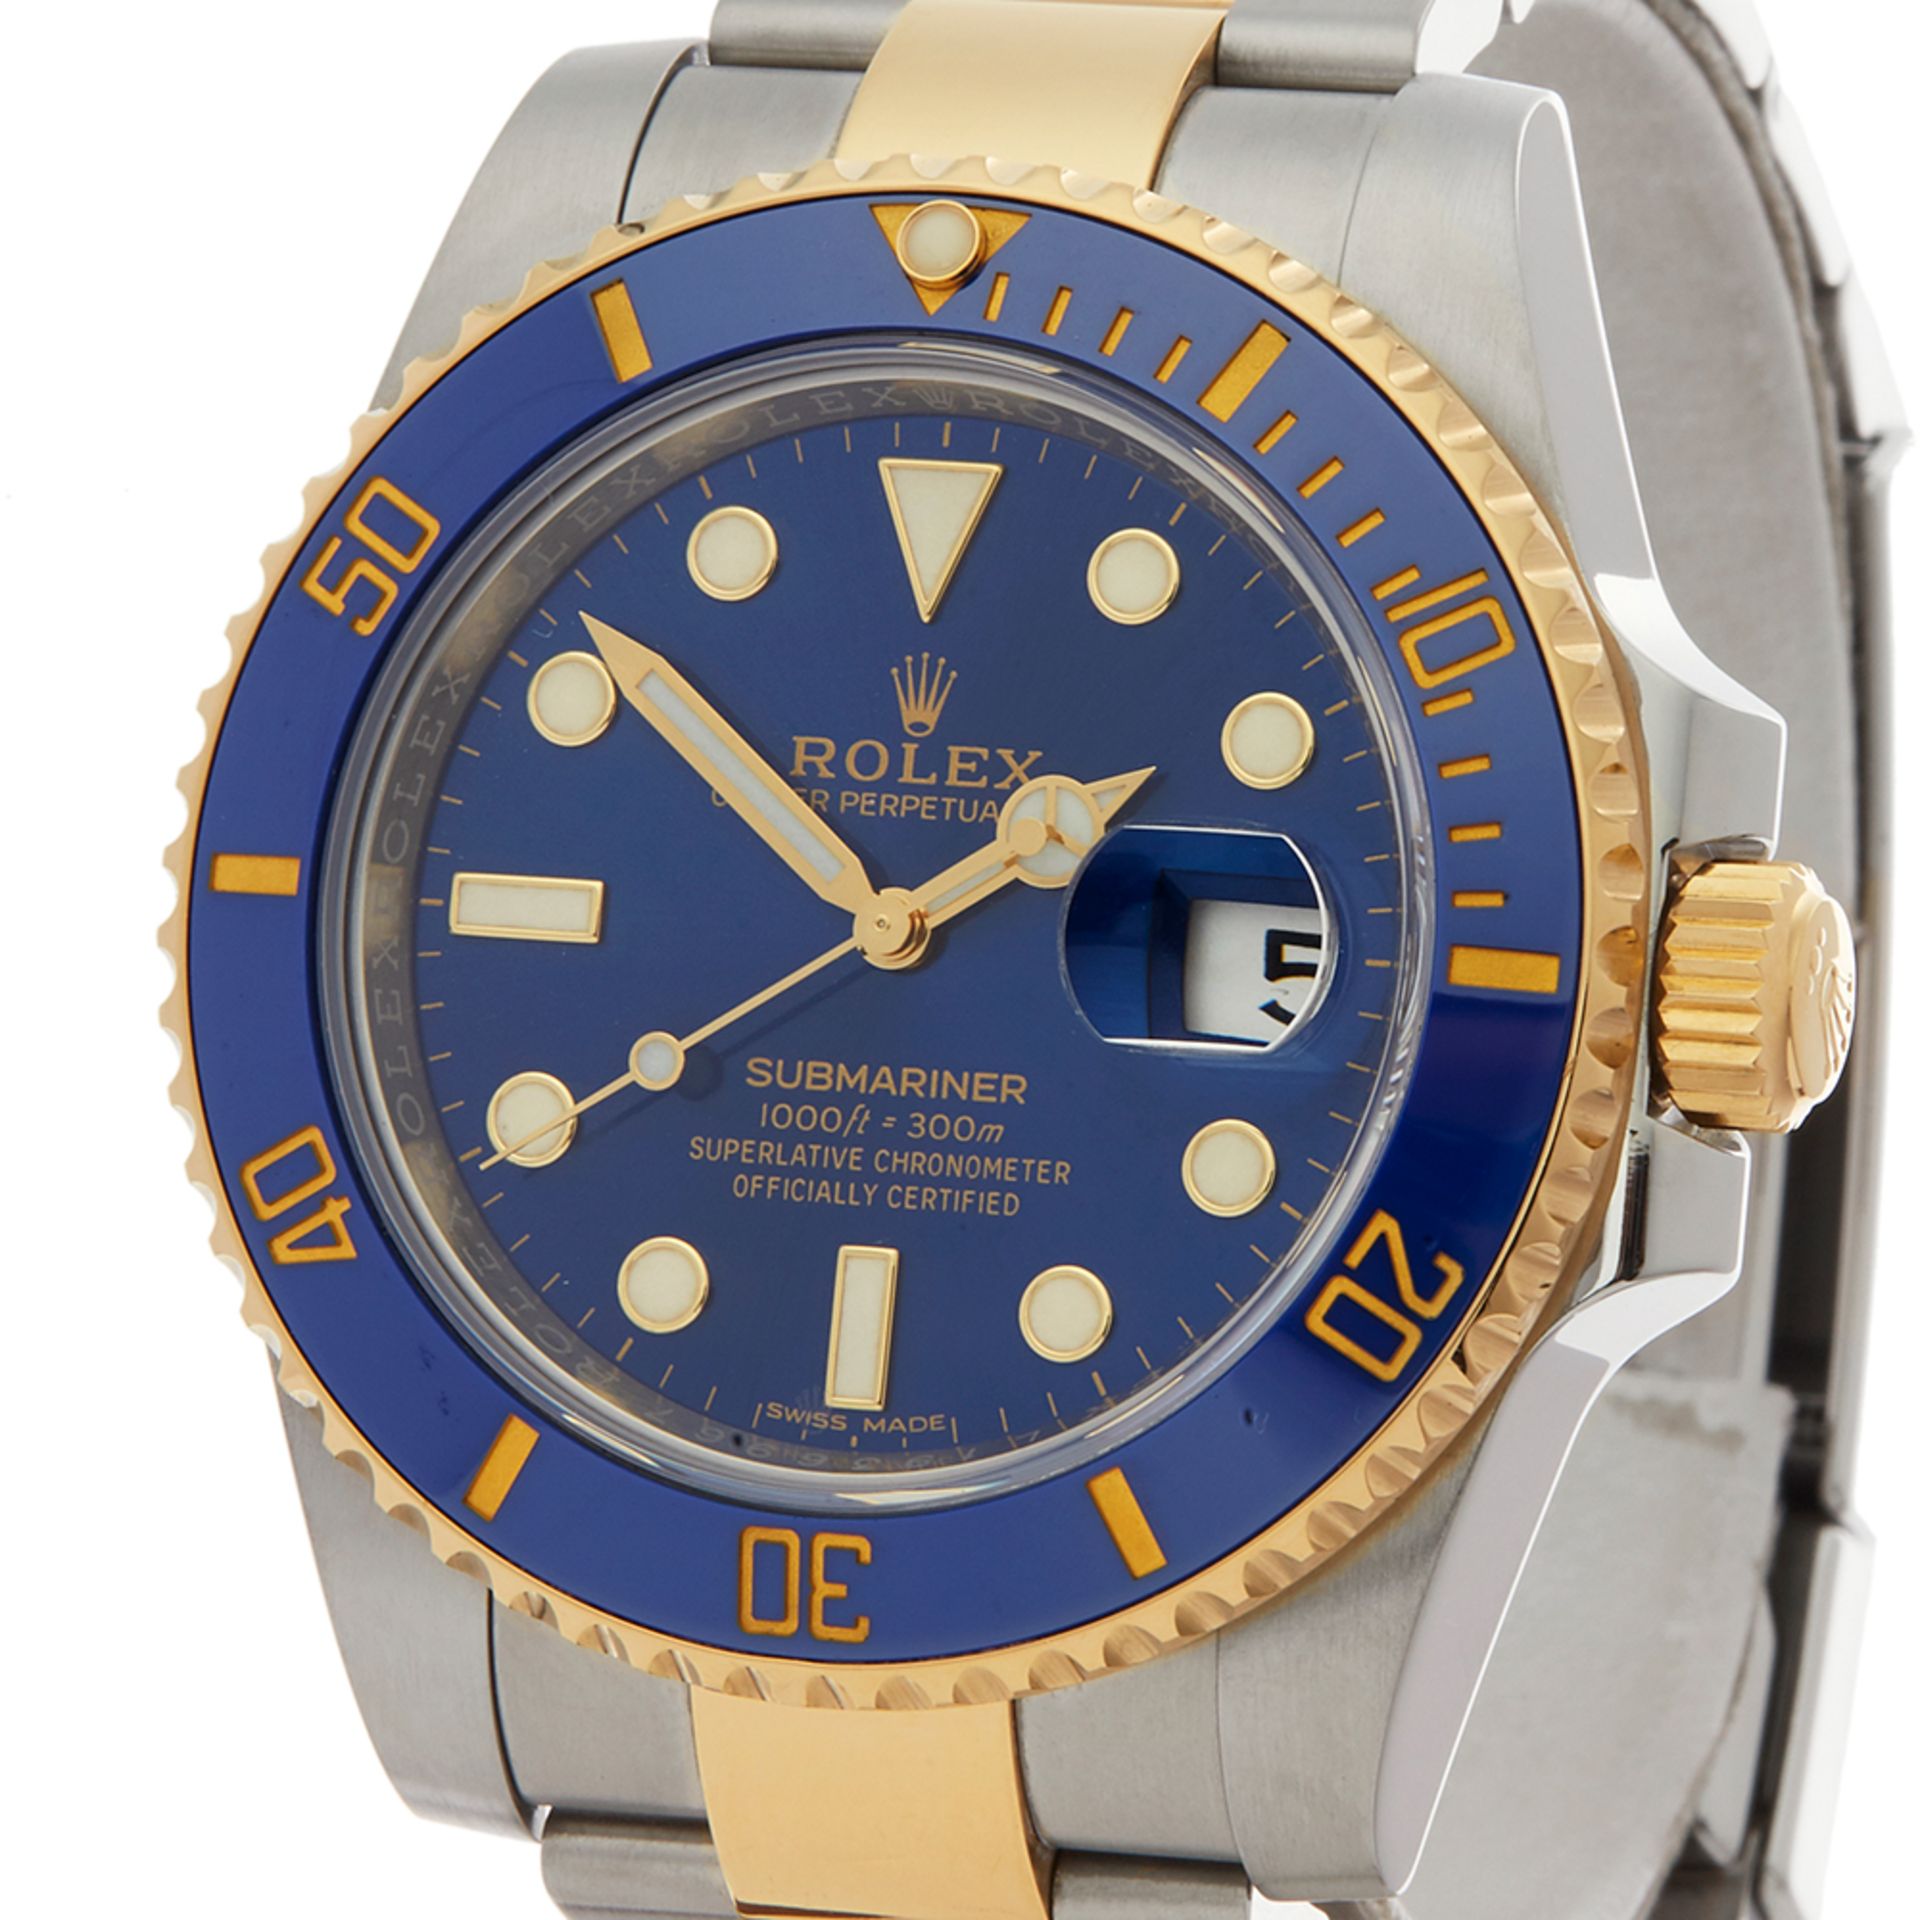 Submariner Stainless Steel & 18K Yellow Gold - 116613LB